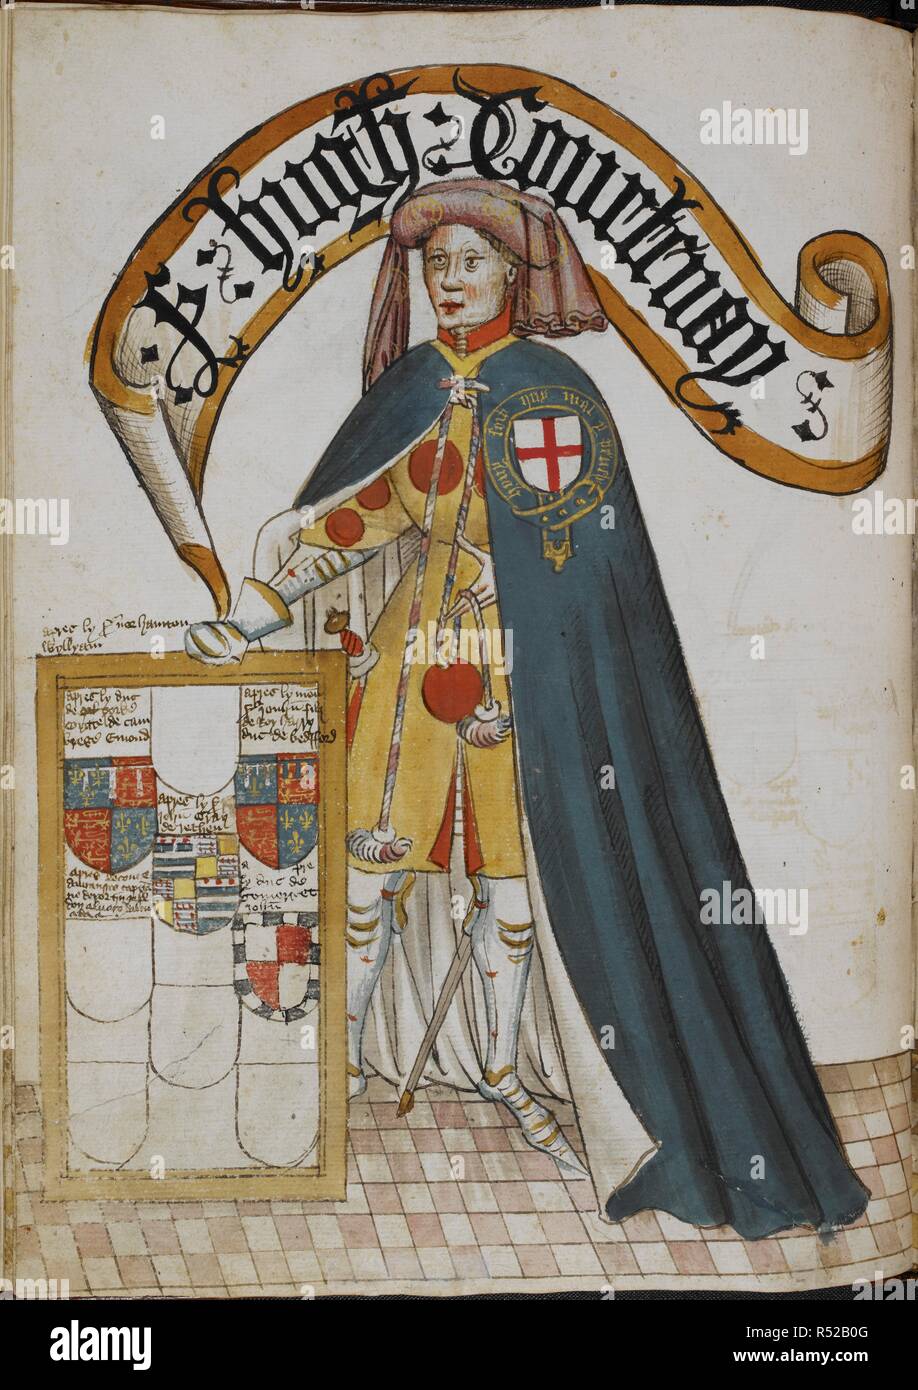 Sir Hugh Courteney, a founder Knight of the Order of the Garter, wearing a blue Garter mantle over plate armour and surcoat displaying his arms. Pictorial book of arms of the Order of the Garter ('William Bruges's Garter Book'). England, S. E. (probably London); c. 1430- c. 1440 (before 1450). Source: Stowe 594 f.10v. Stock Photo